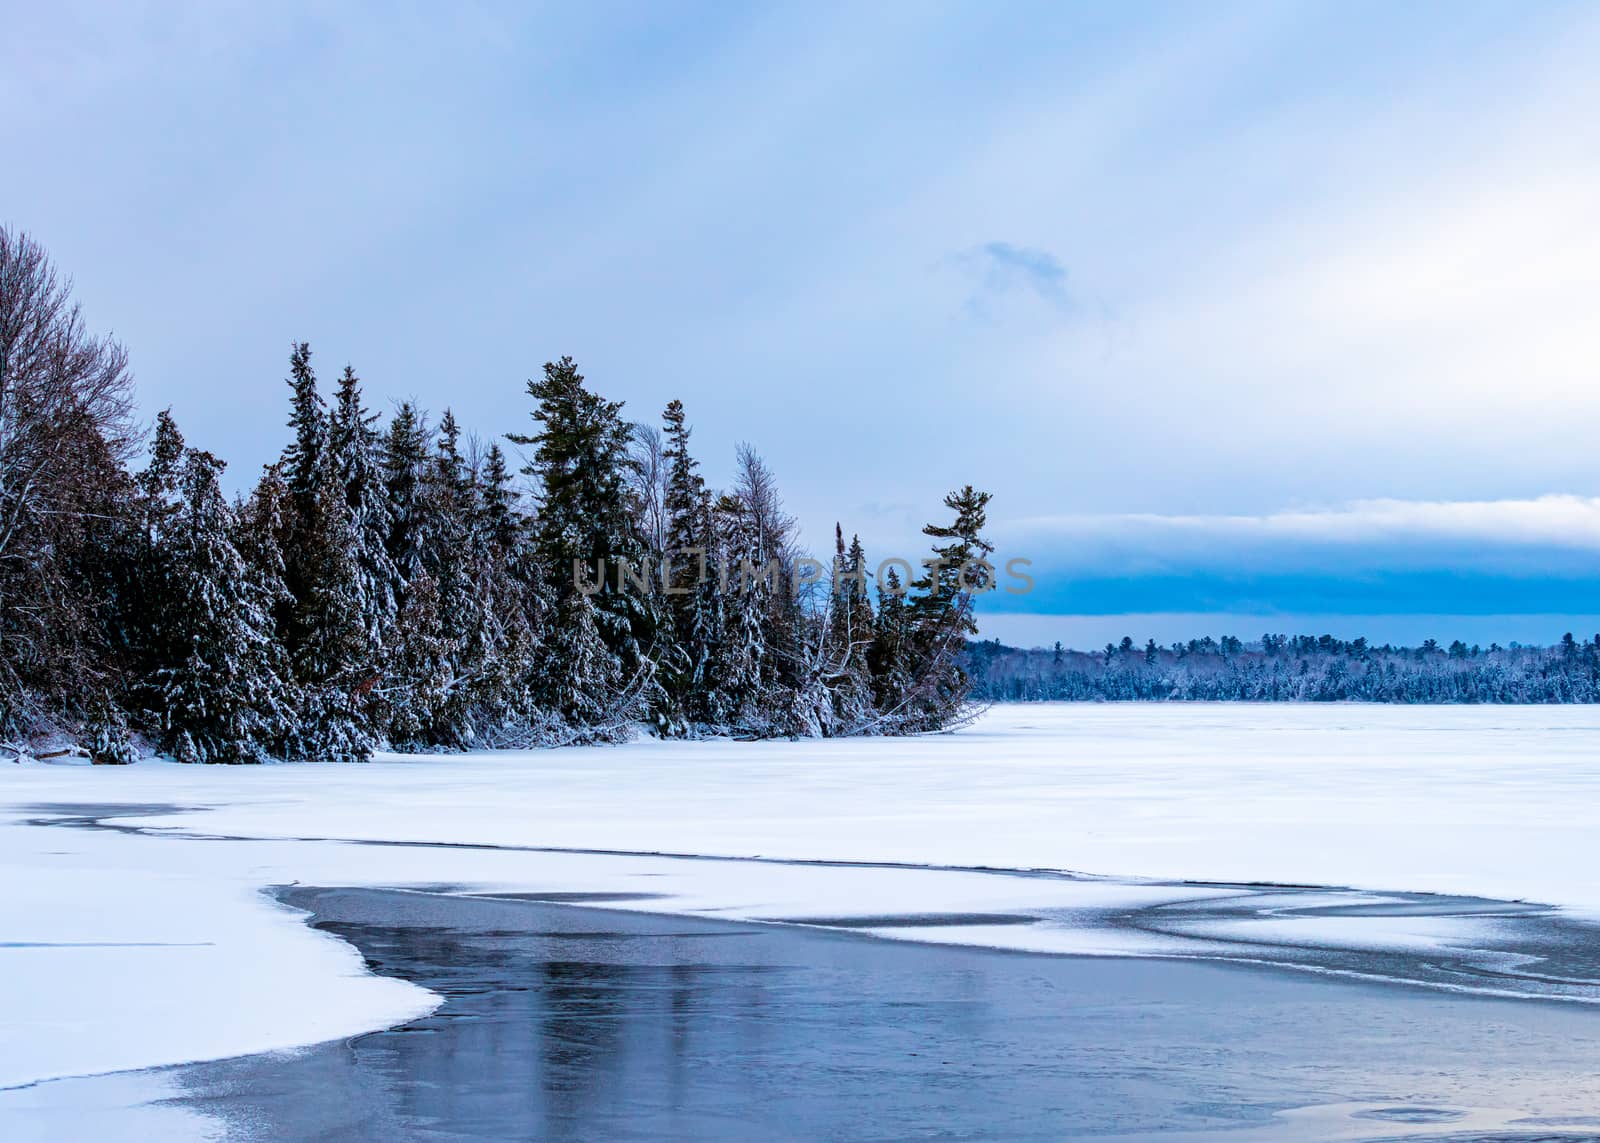 Snowy evergreen pine trees on a freezing lake by colintemple